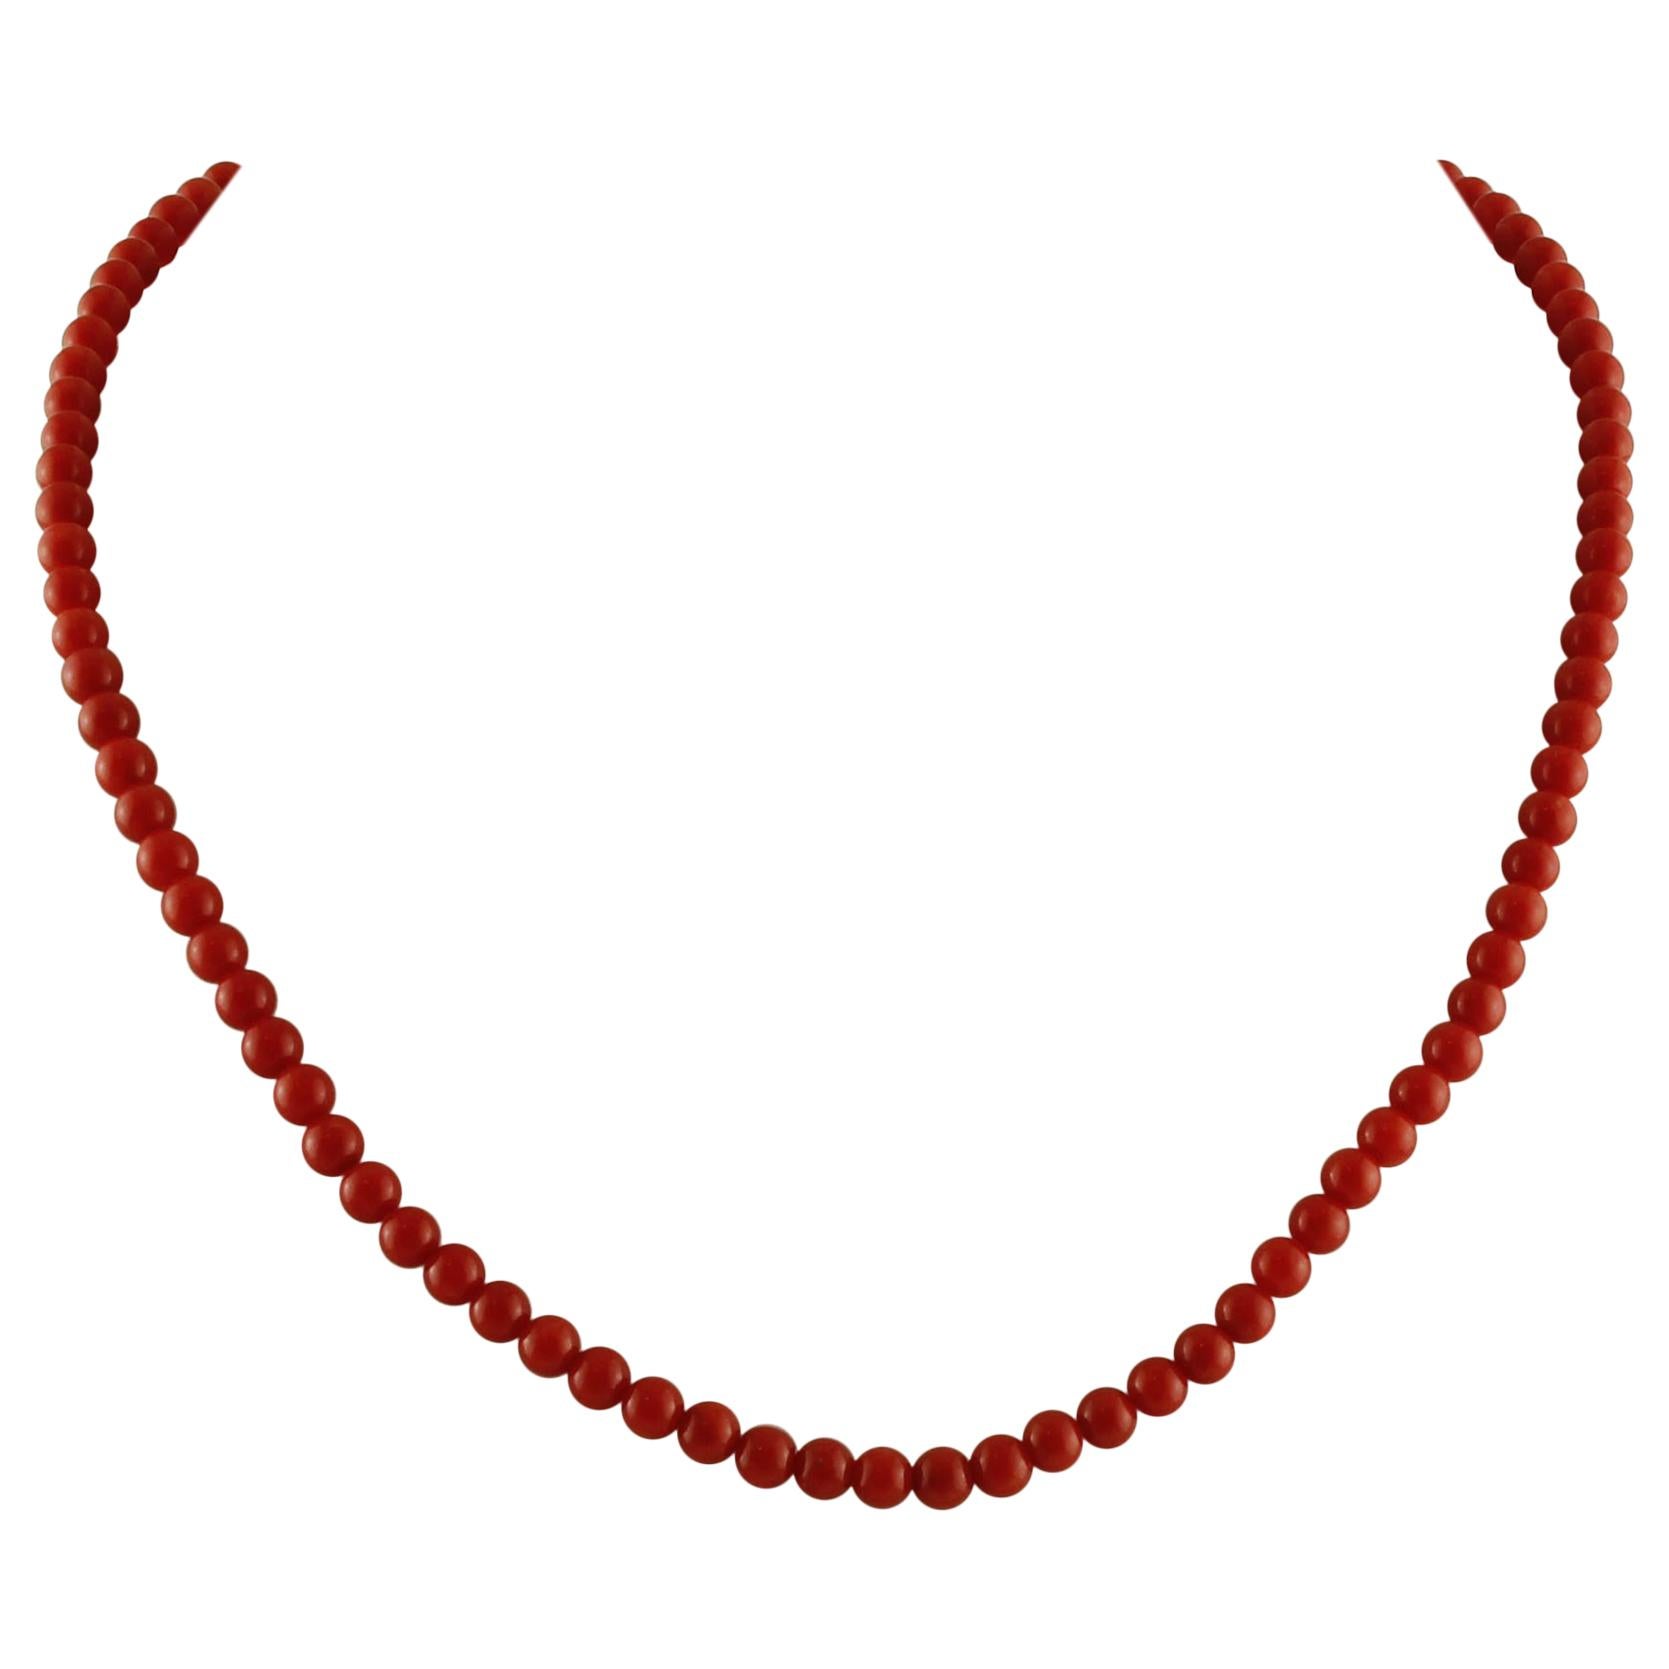 Beaded Coral Necklace with 18 Karat Yellow Gold Closure